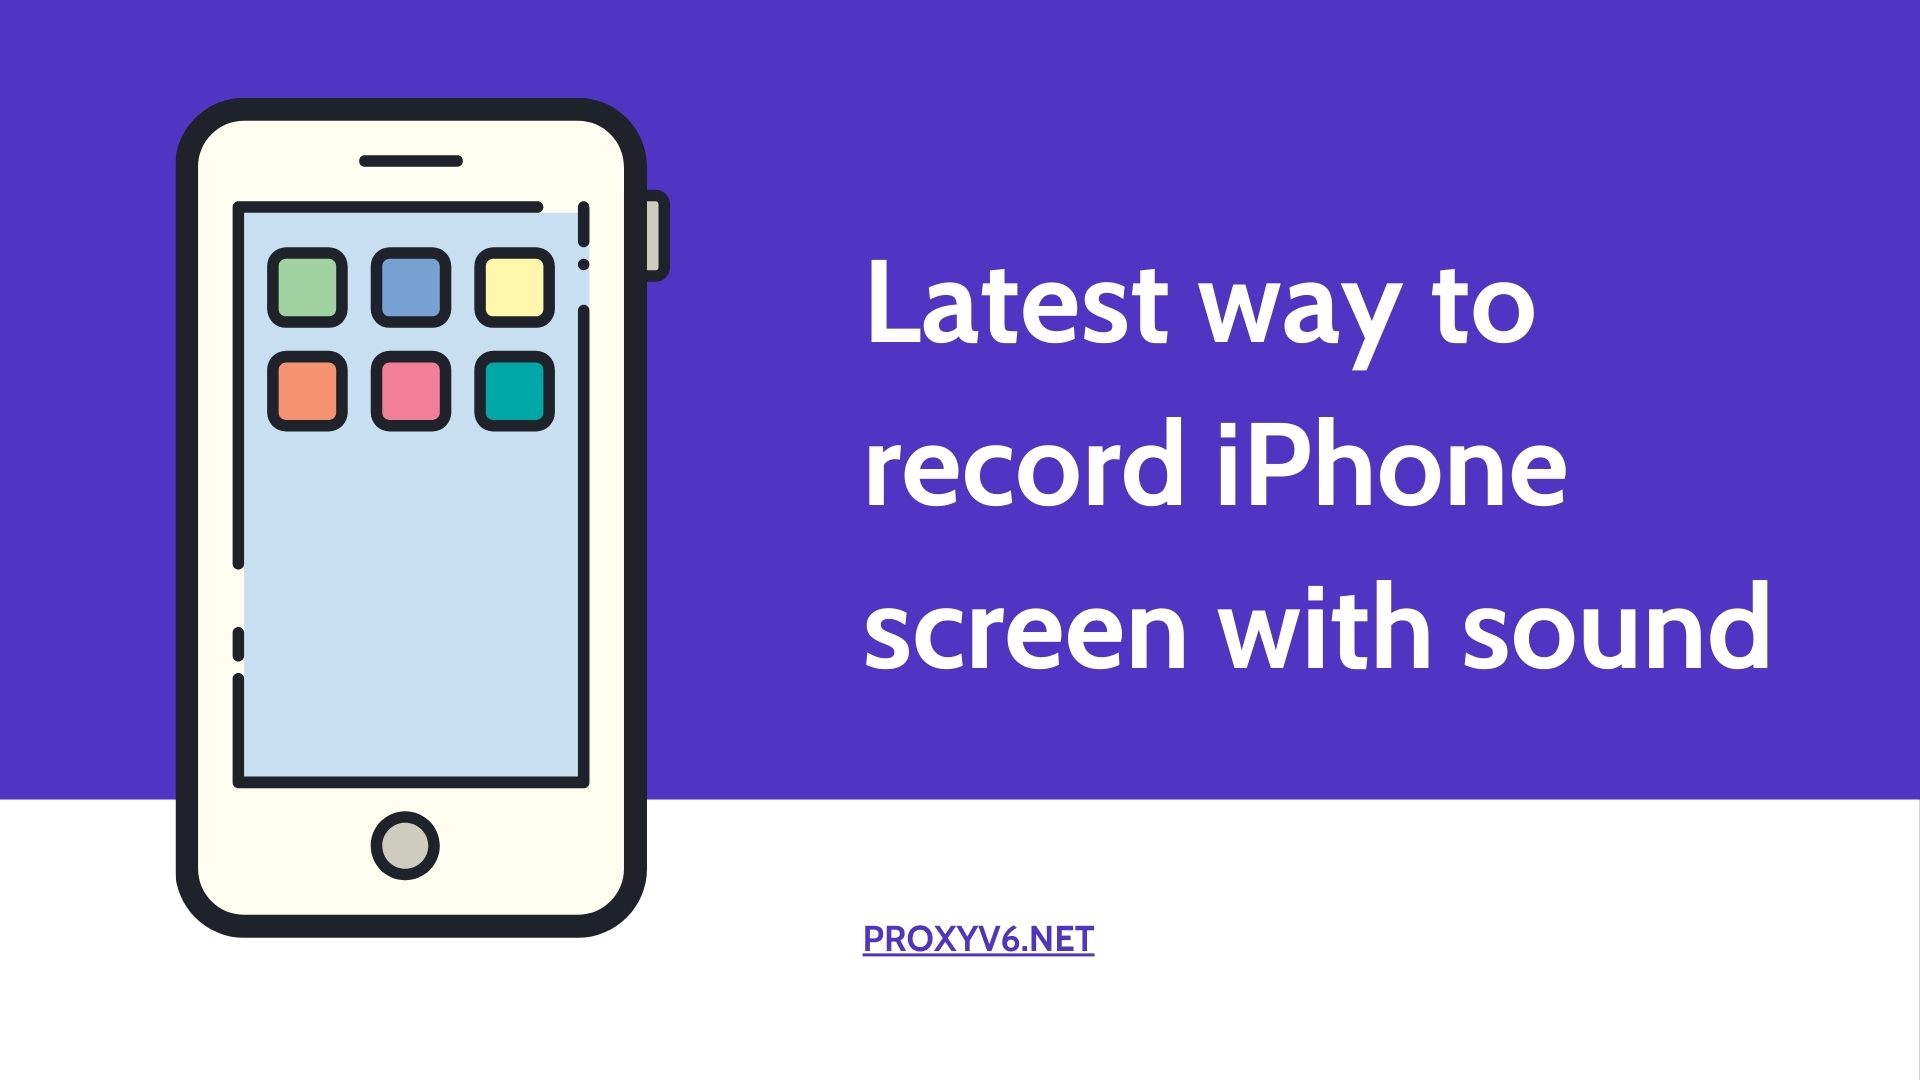 Latest way to record iPhone screen with sound